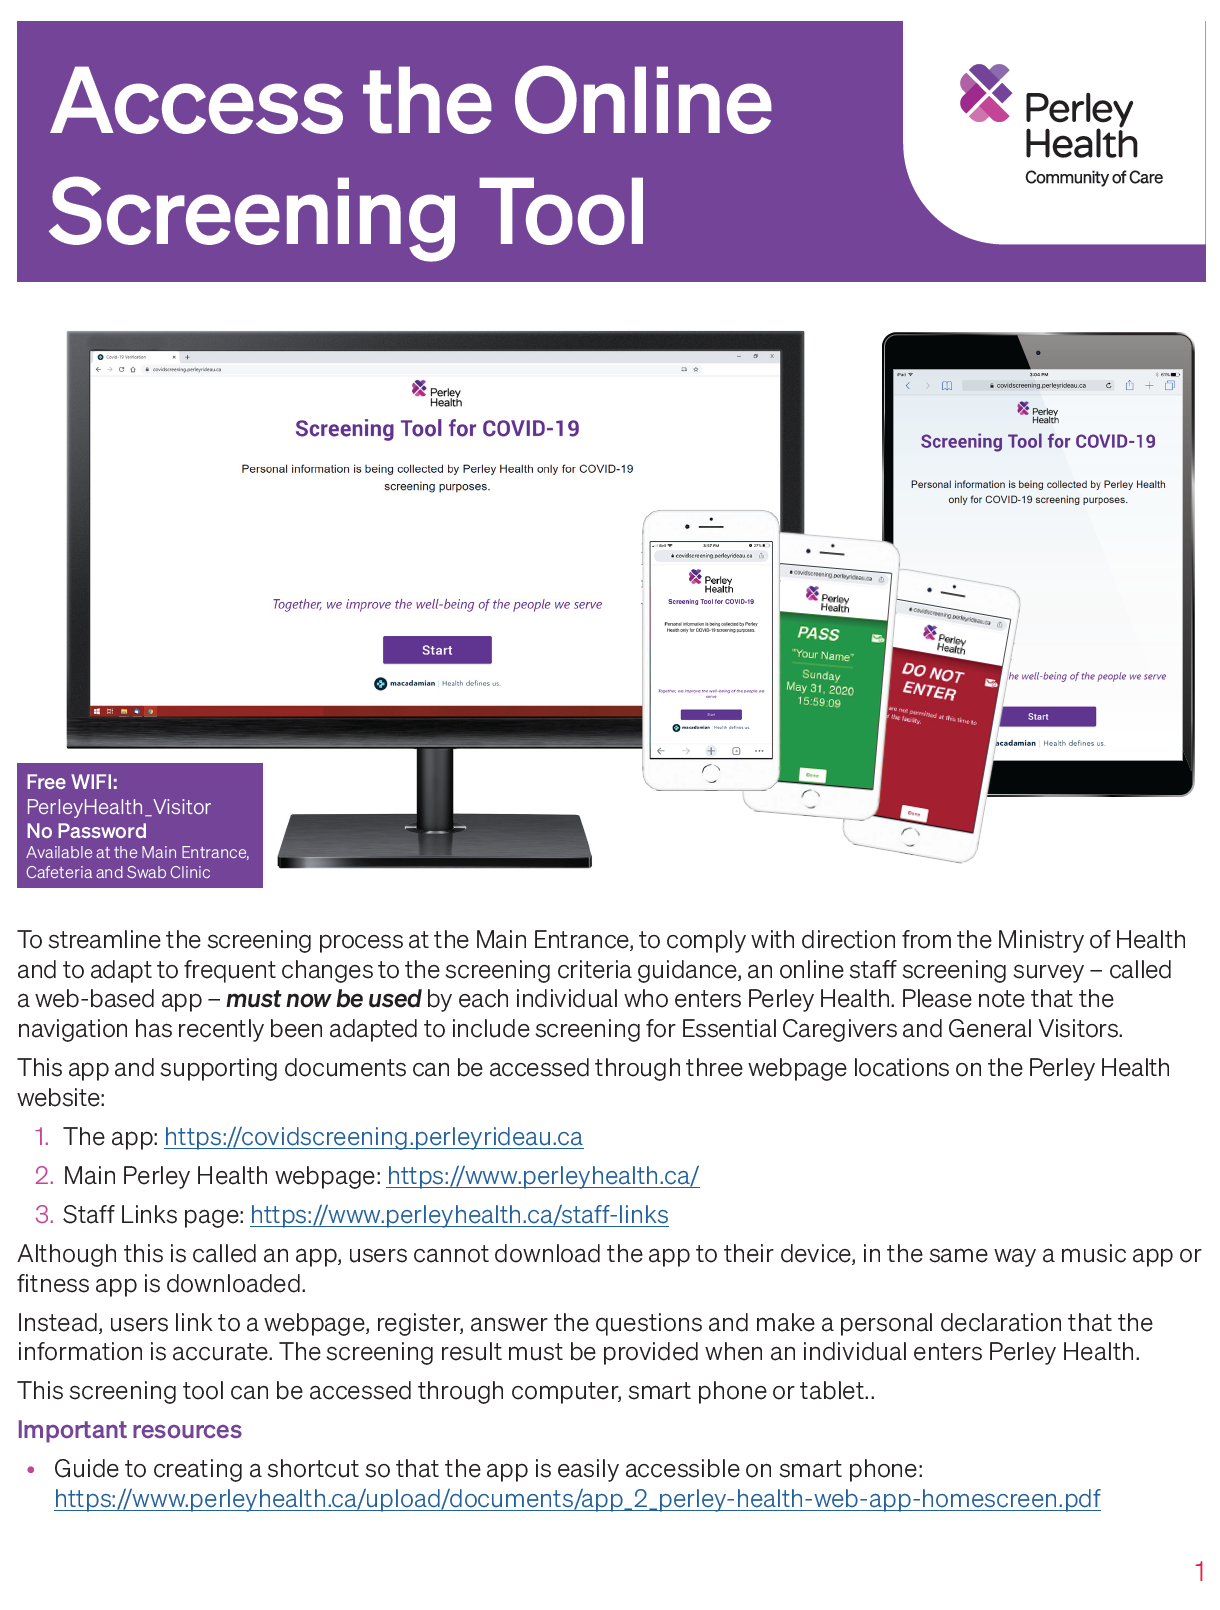 2021 COVID-19 Screening Tool Information Cover Preview Image